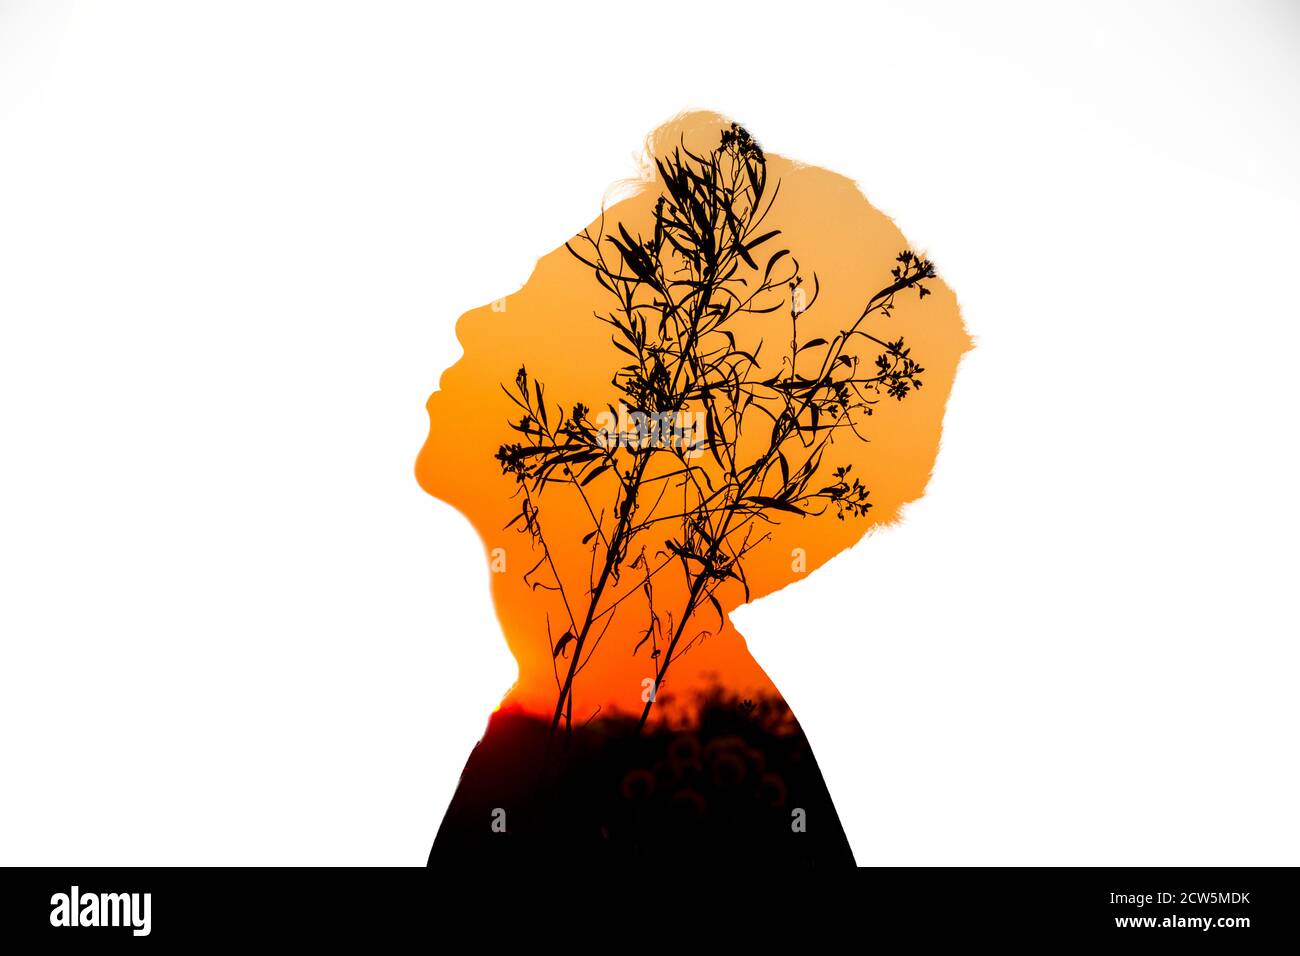 Multiple exposure digital composite with a silhouette of a person in profile and a sunset with a silhouette of a tree. Stock Photo